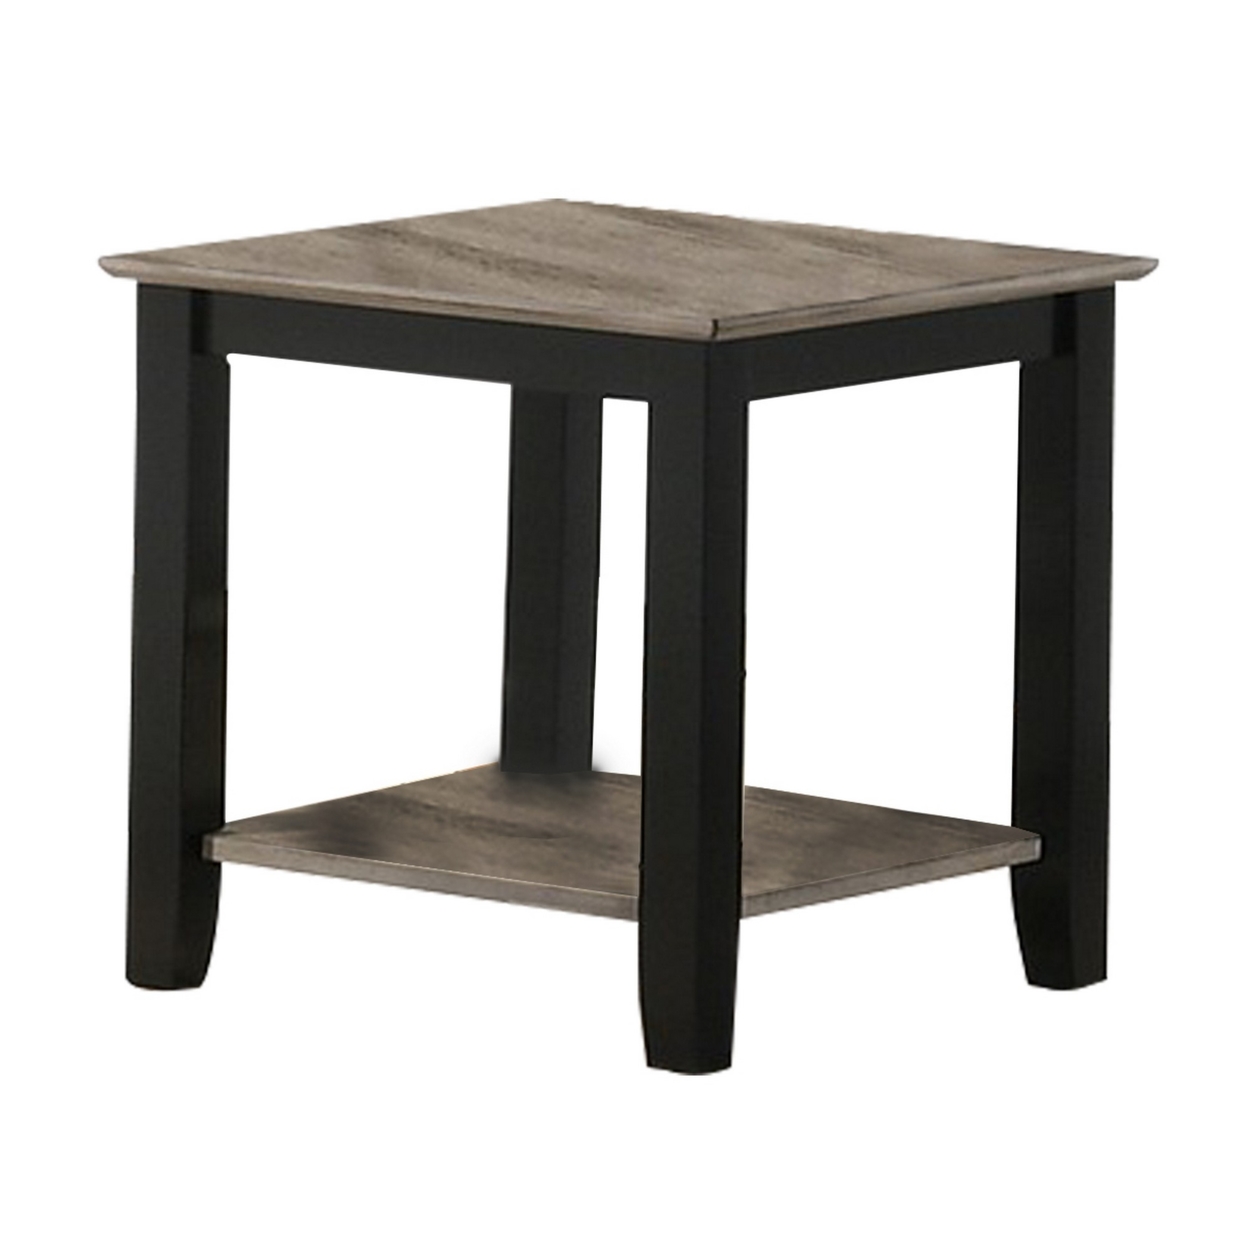 Wooden End Table With One Open Shelf, Black And Gray- Saltoro Sherpi